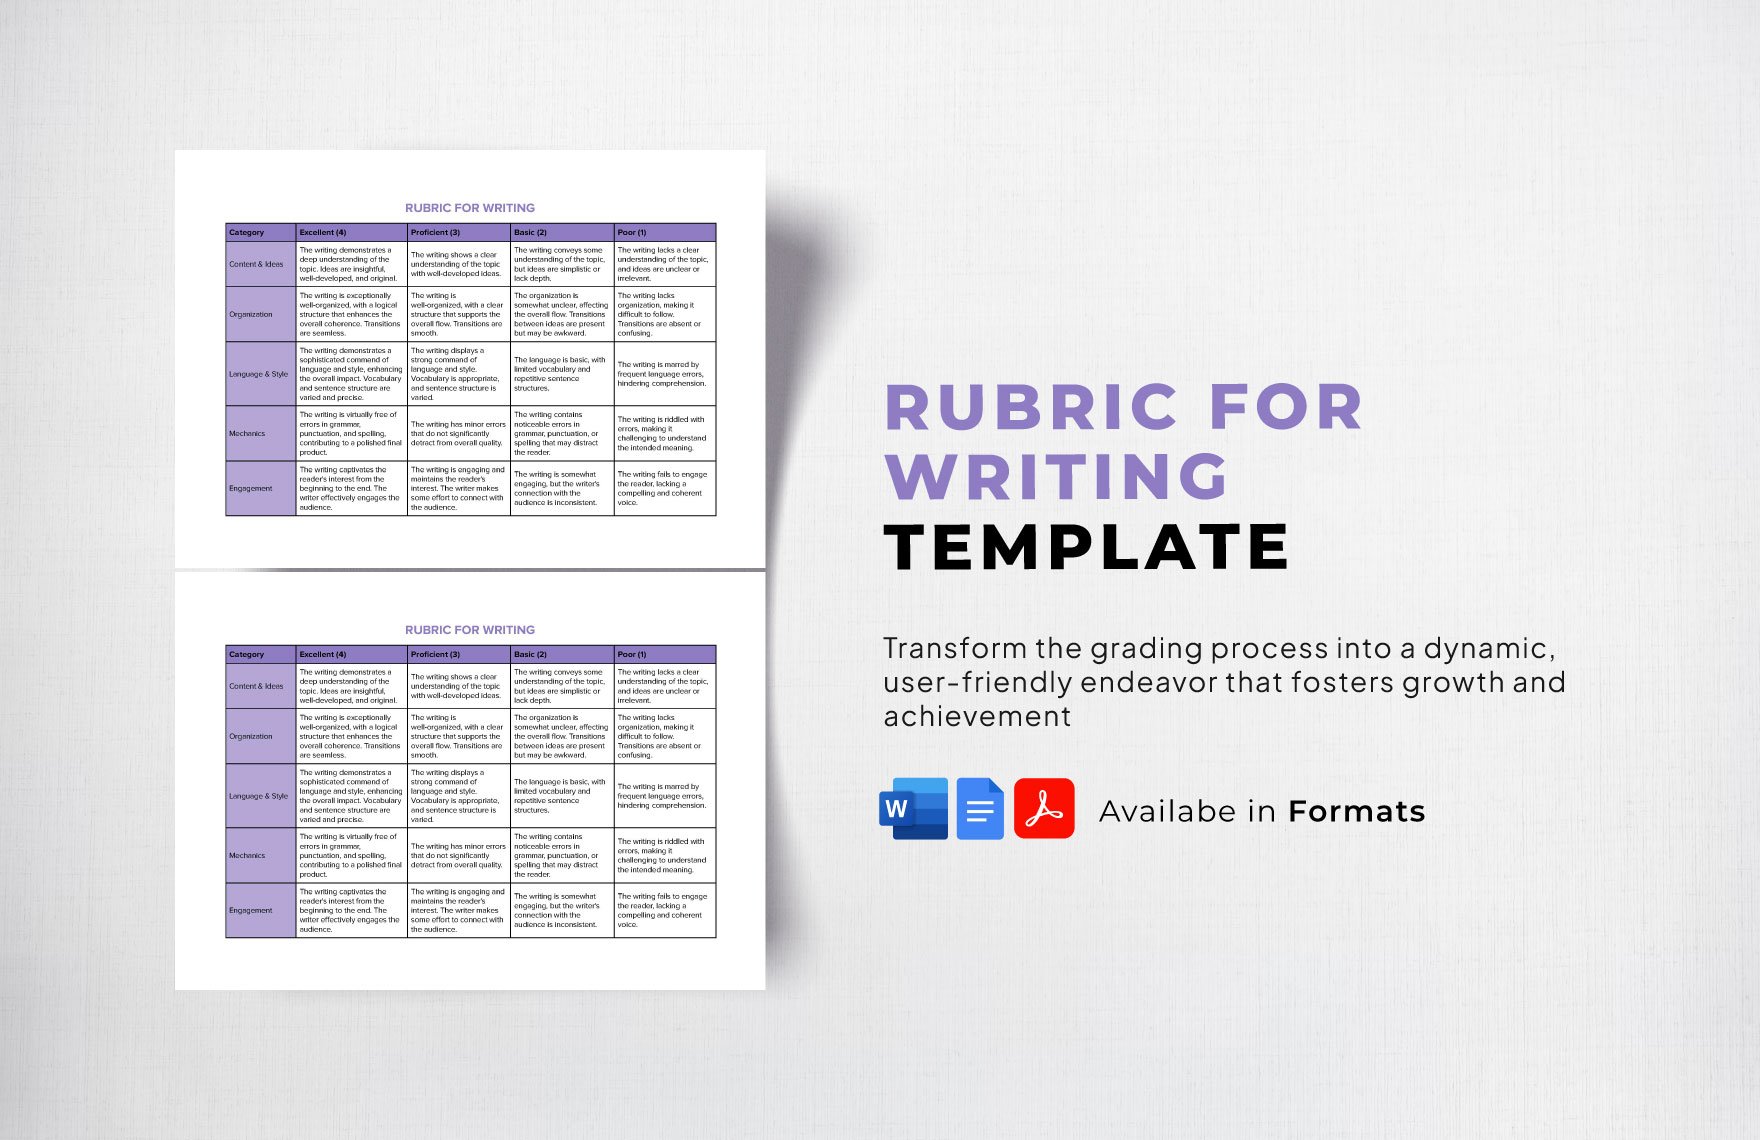 Rubric for Writing Template